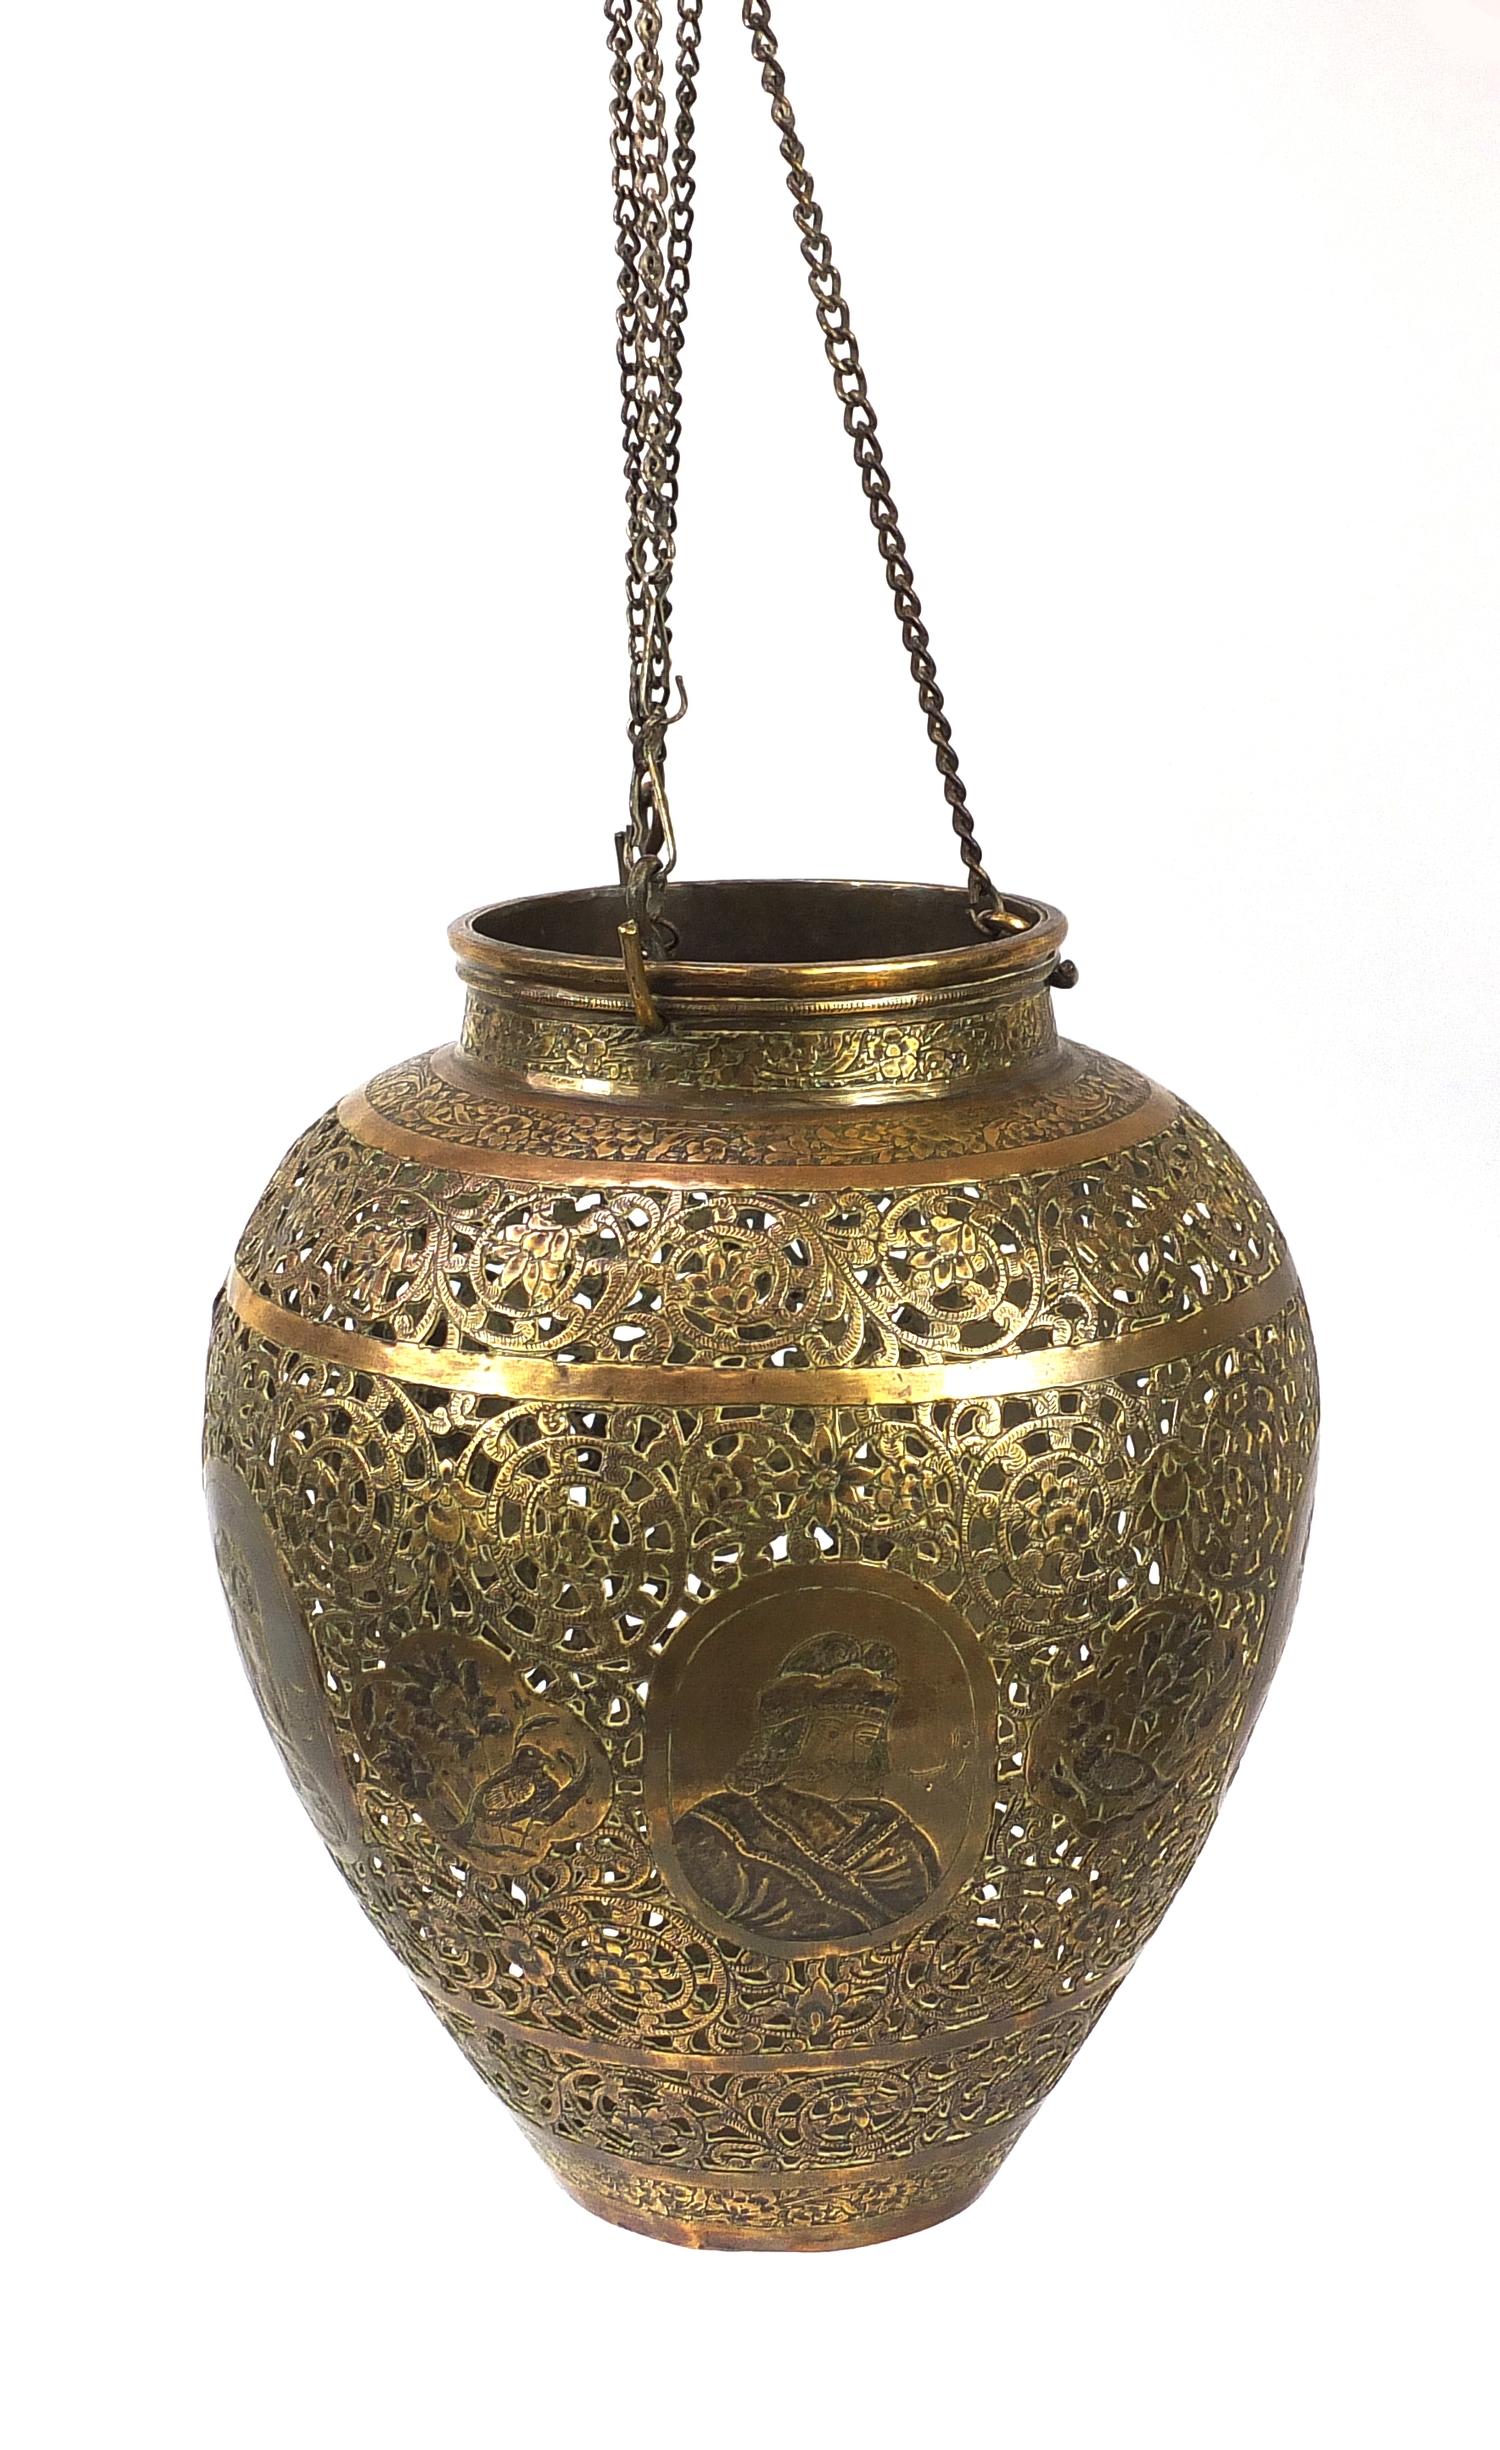 18th century Persian open work lamp engraved with panels of consorts and birds, 22.5cm high : For - Image 2 of 5